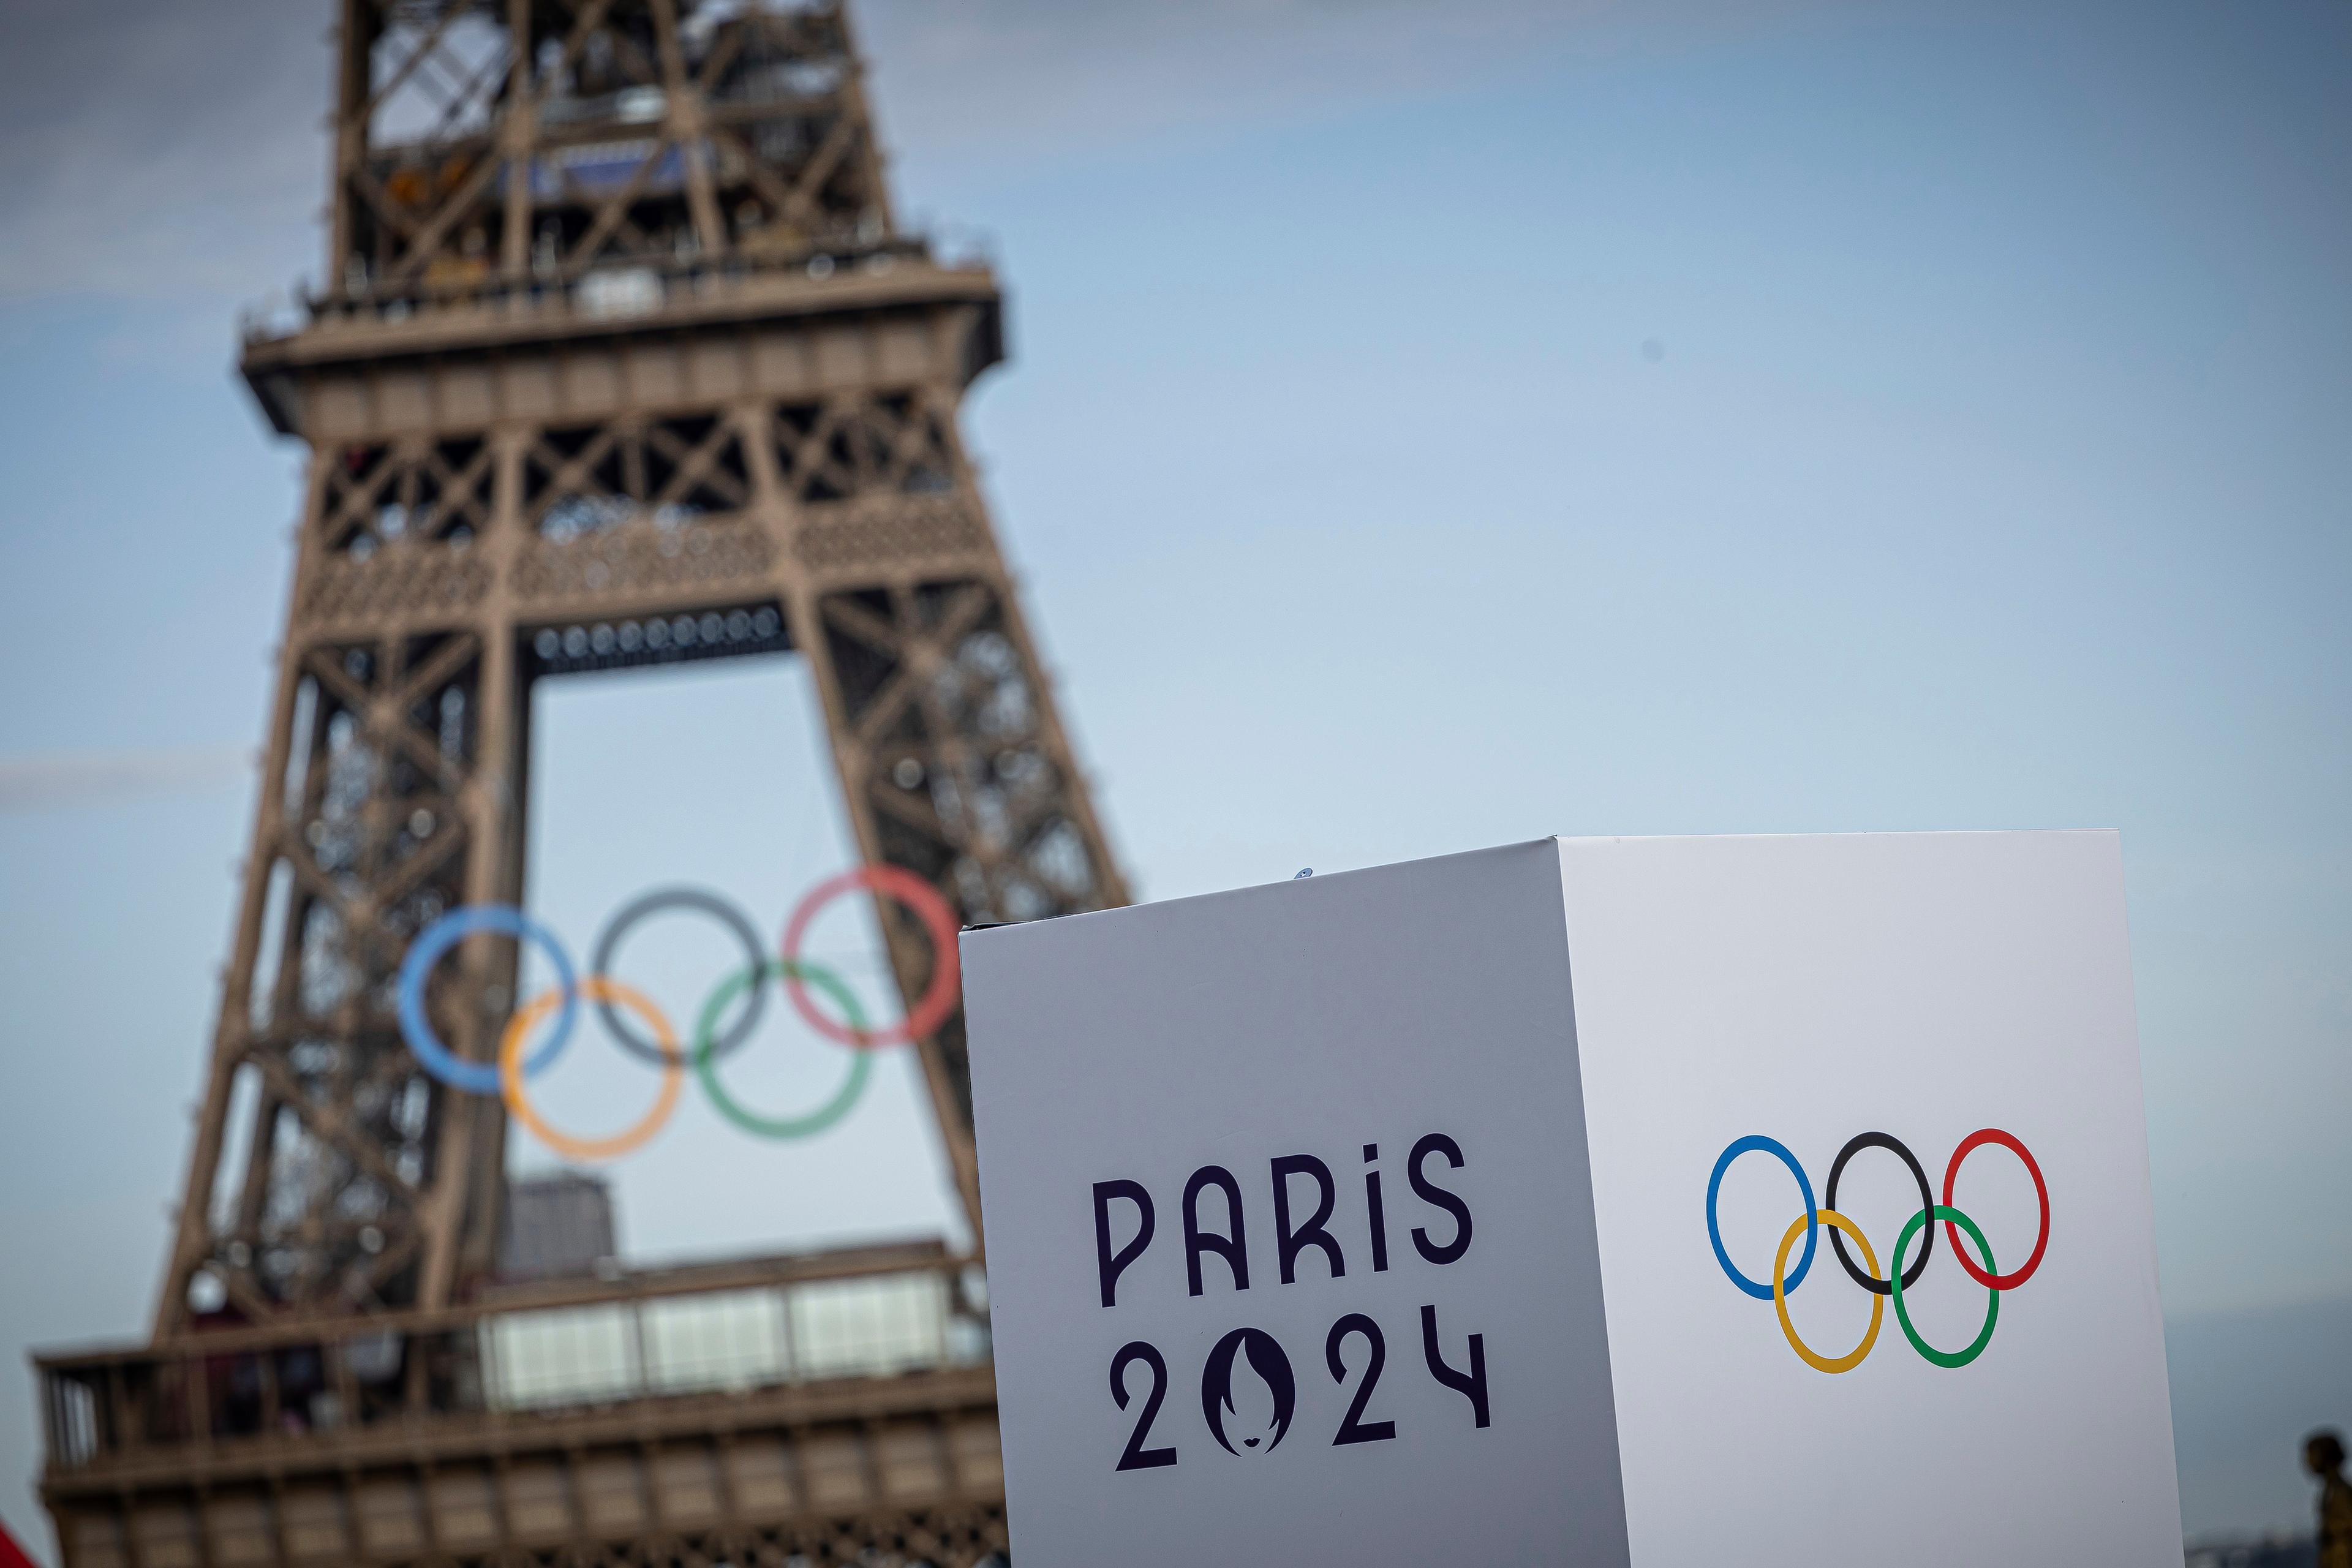 OLY Paris Olympic Rings in front of the Eiffel Tower.